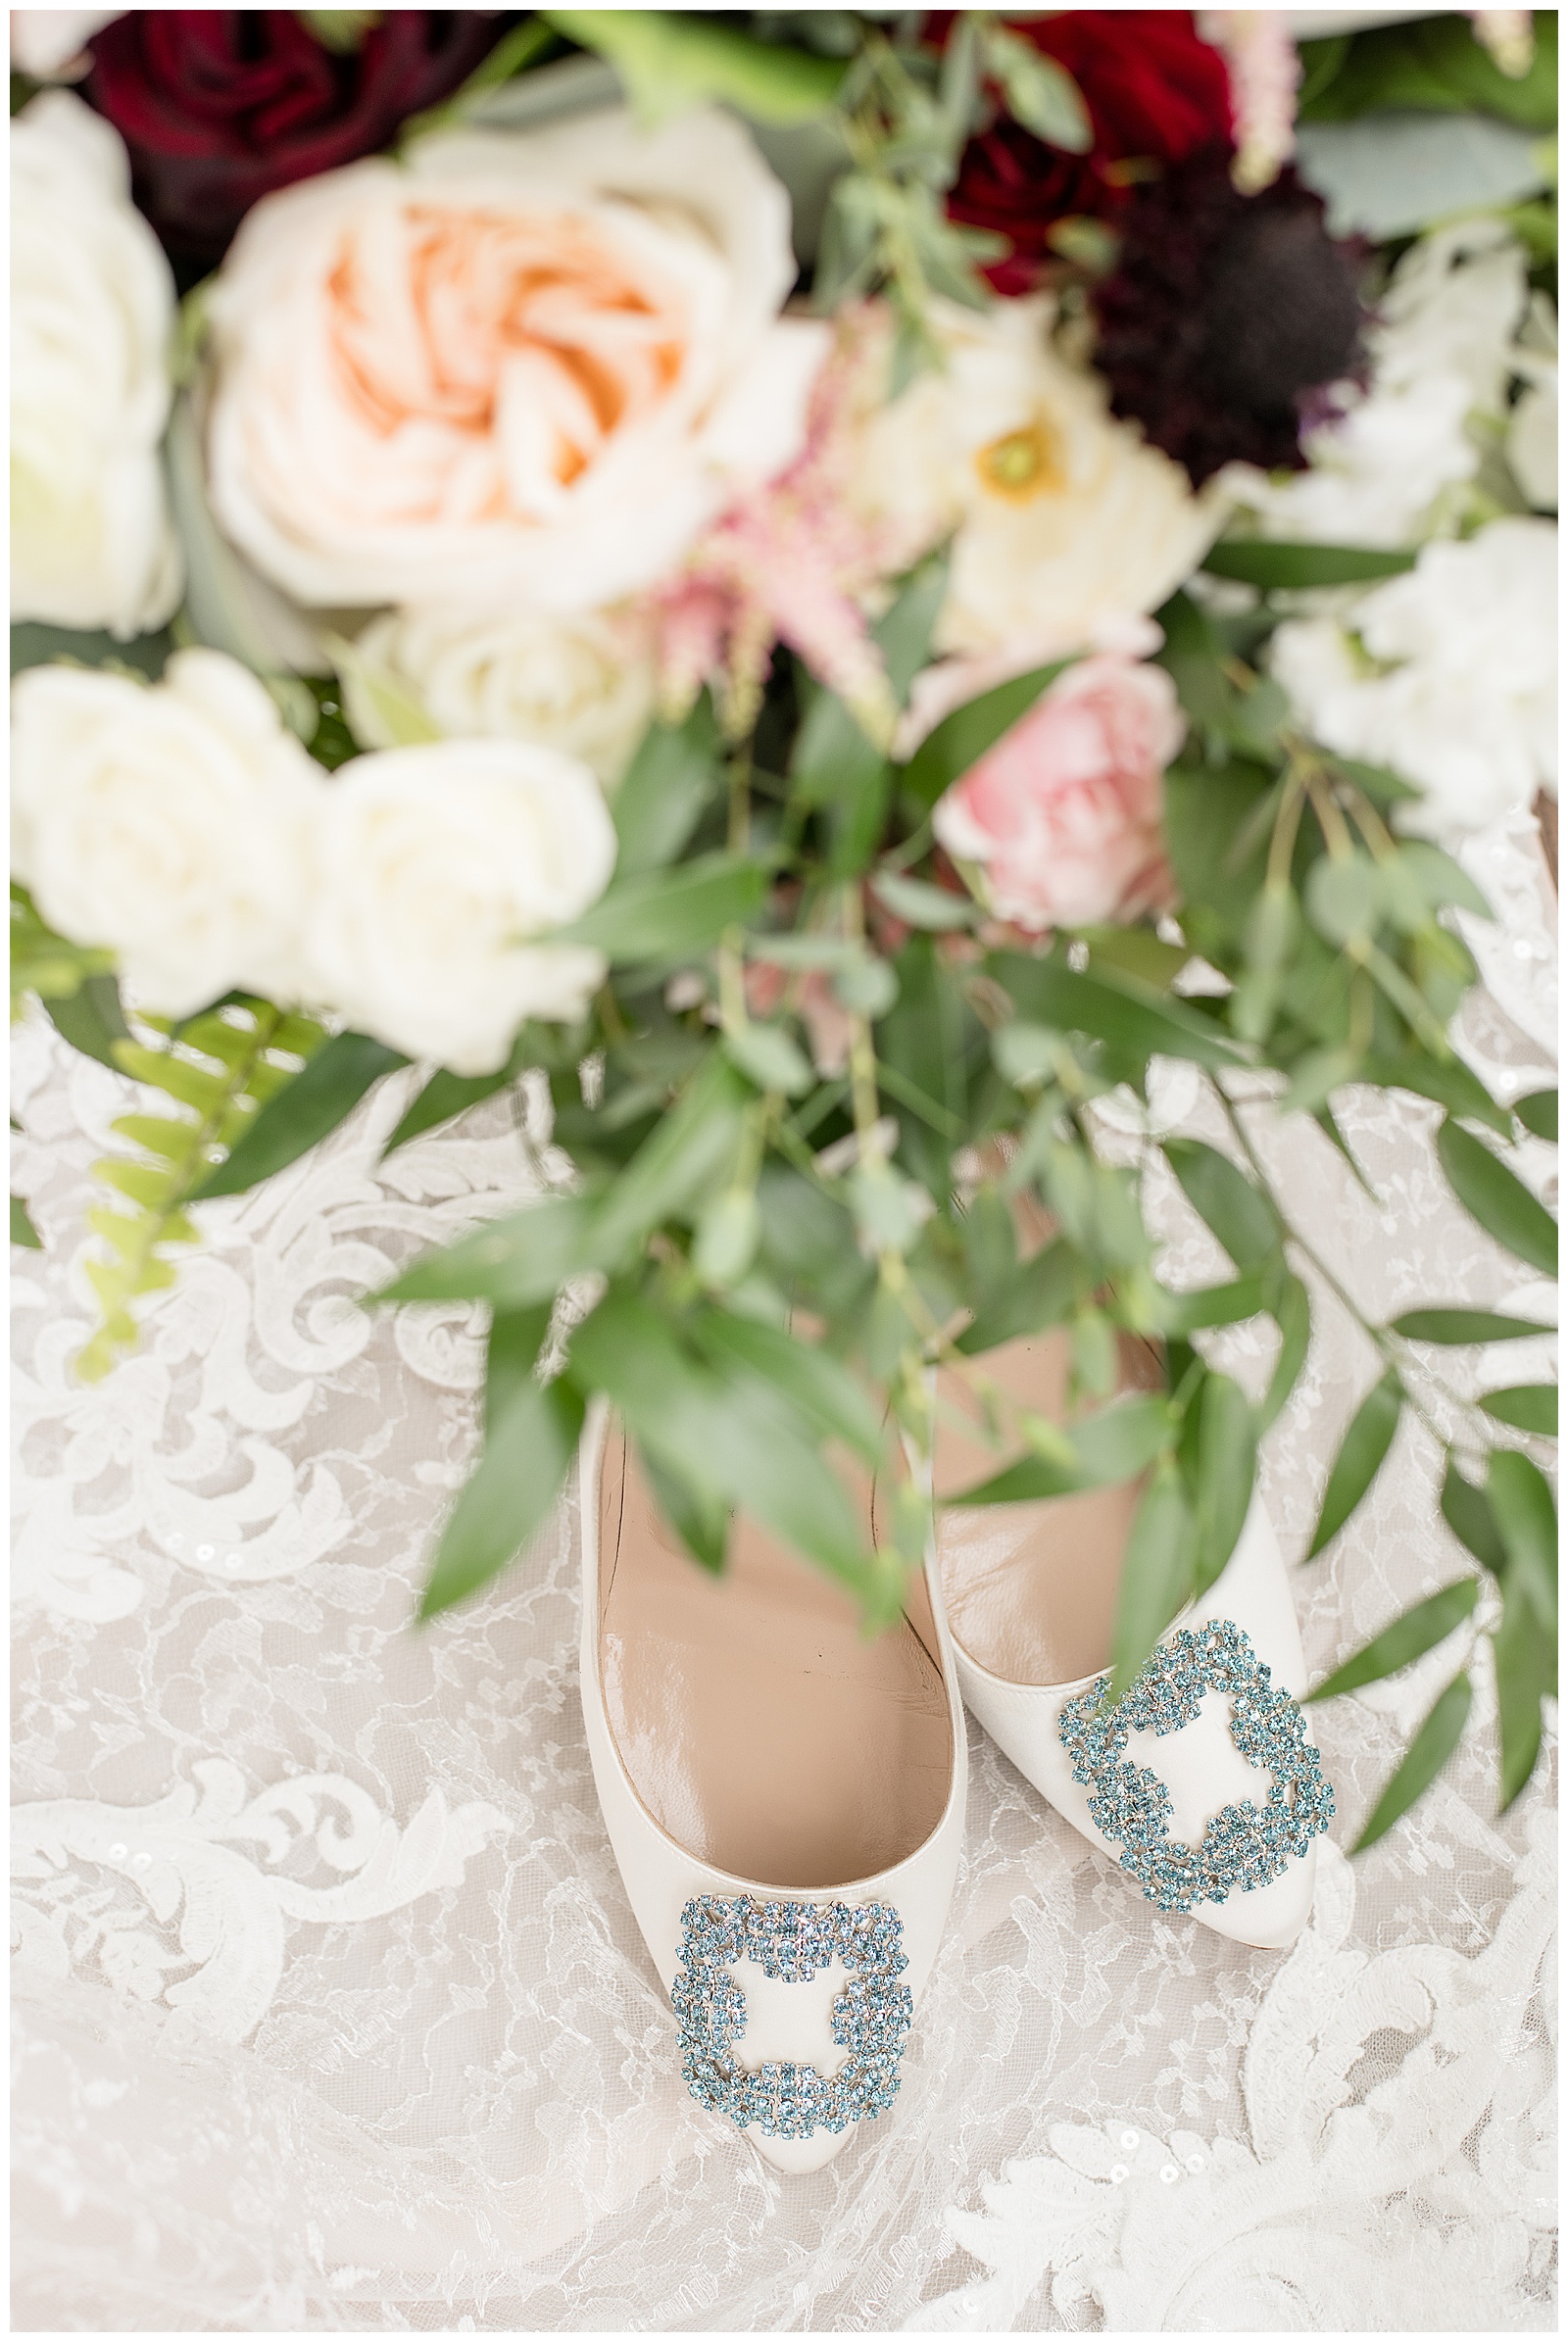 bride's white shoes with blue detailing sitting on lace by beautiful pink and white bridal bouquet